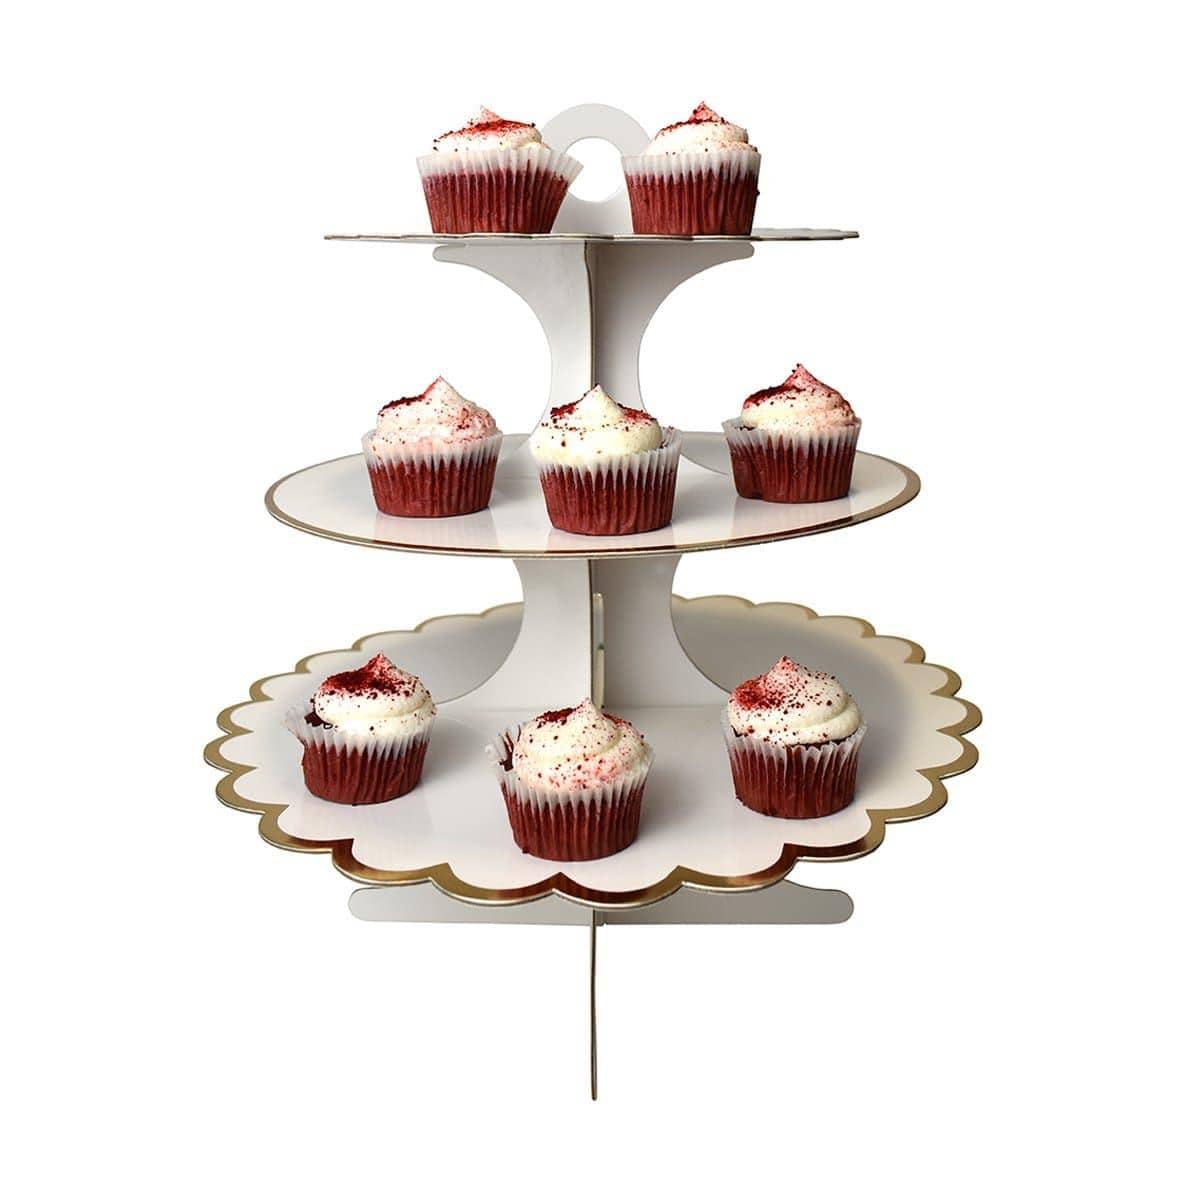 Buy Cake Supplies Cake Stand 3 Tiers - White sold at Party Expert